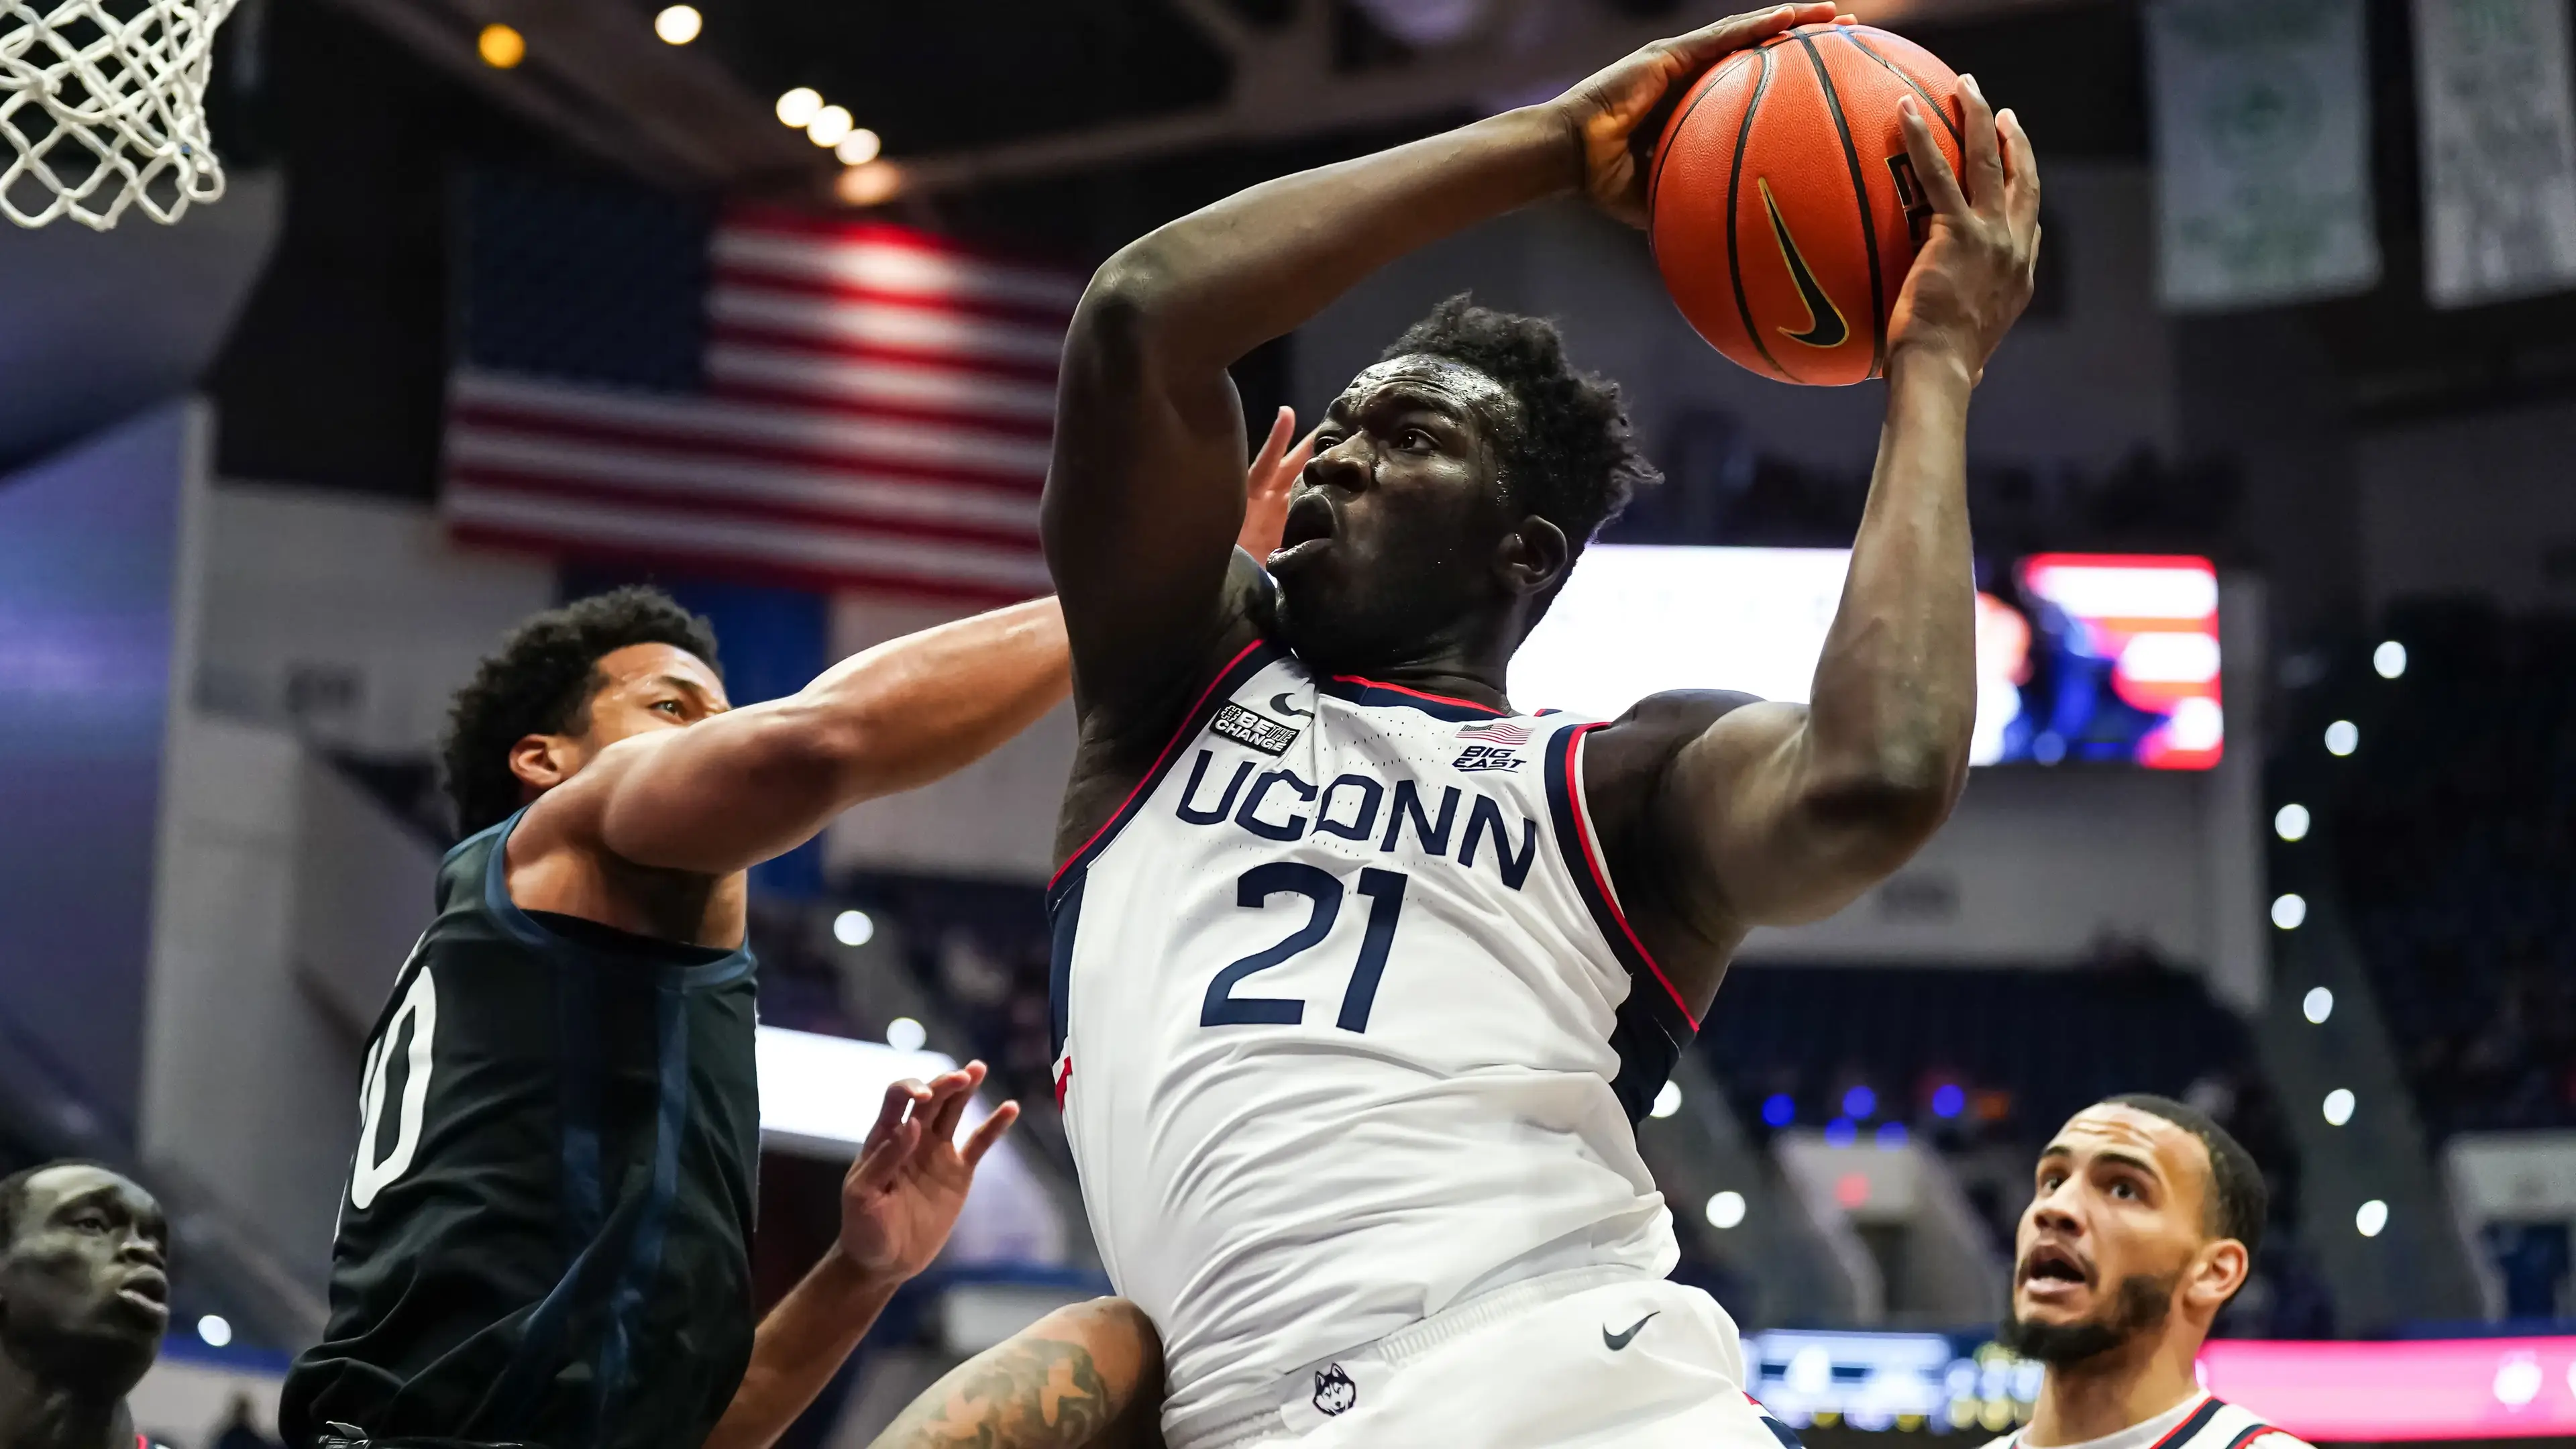 Jan 18, 2022; Hartford, Connecticut, USA; Connecticut Huskies forward Adama Sanogo (21) works the ball against the Butler Bulldogs in the first half at XL Center. / David Butler II-USA TODAY Sports